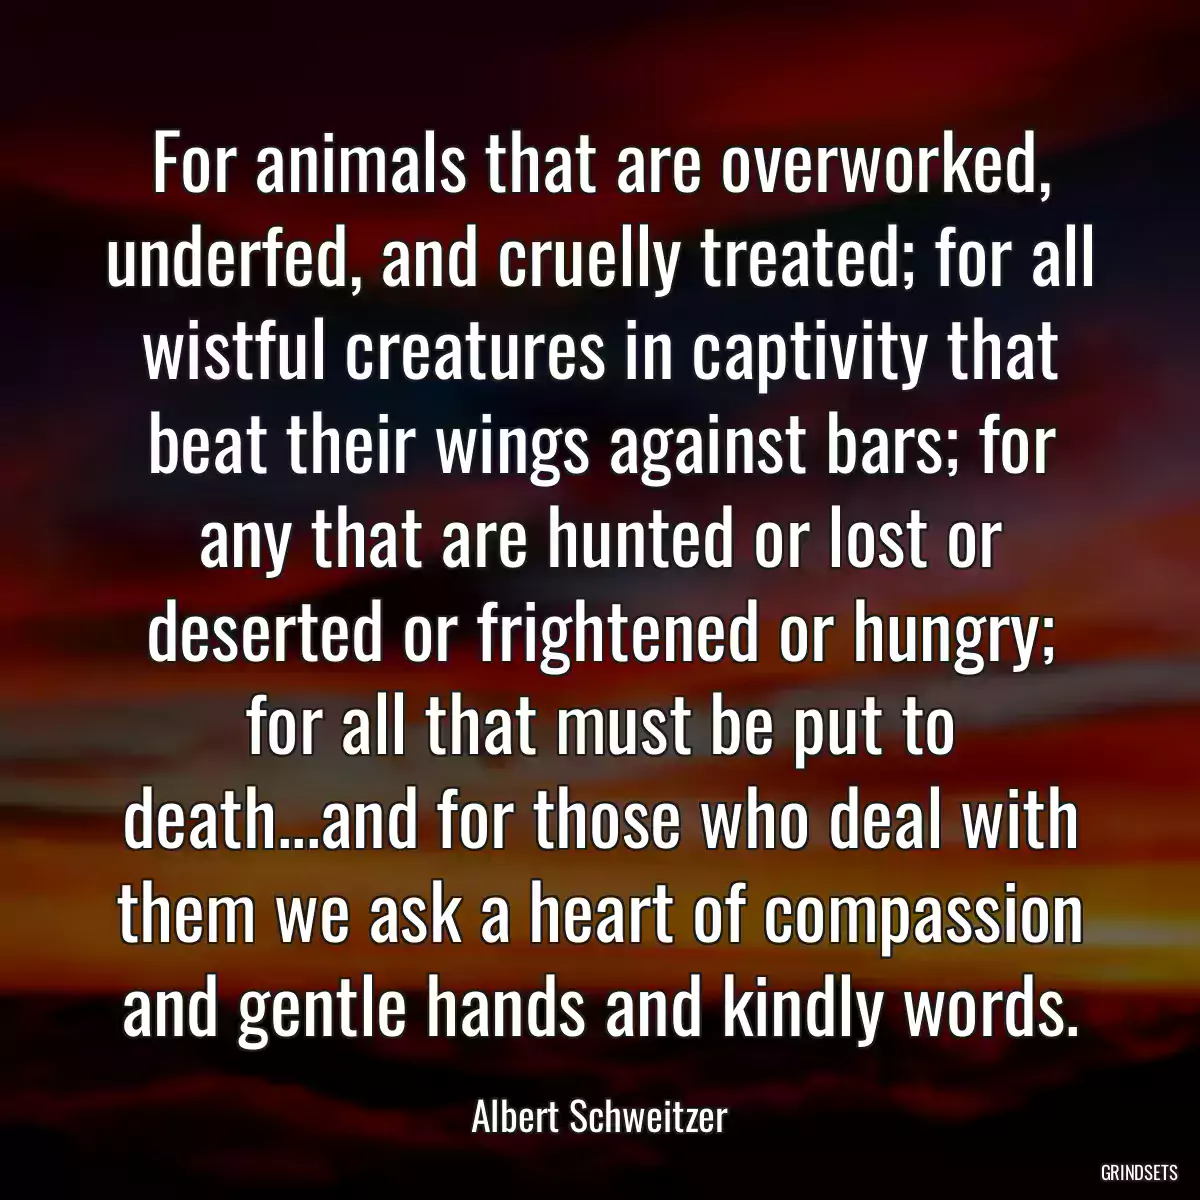 For animals that are overworked, underfed, and cruelly treated; for all wistful creatures in captivity that beat their wings against bars; for any that are hunted or lost or deserted or frightened or hungry; for all that must be put to death...and for those who deal with them we ask a heart of compassion and gentle hands and kindly words.